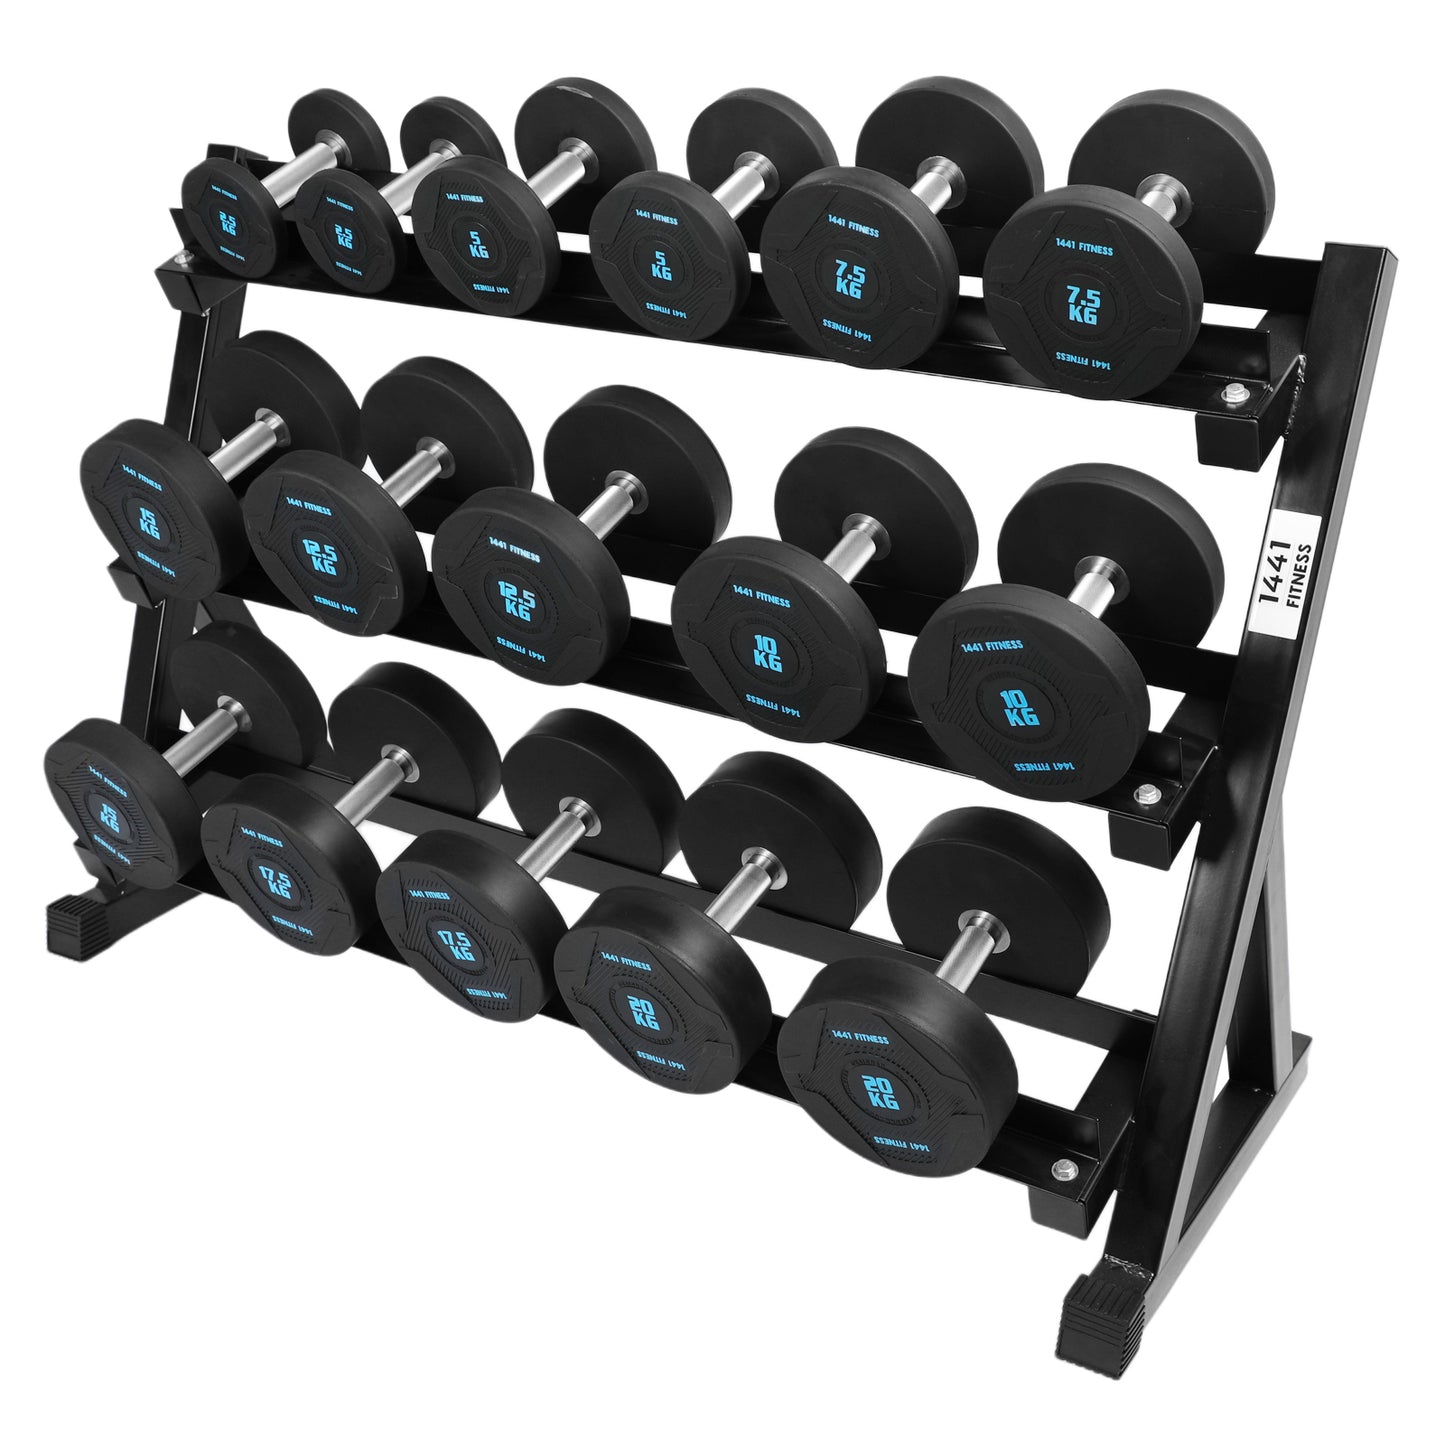 1441 Fitness PU Rubber Round Dumbbell Combo Set 2.5 Kg - 20 Kg (8 Pairs) with 3 Tier Rack